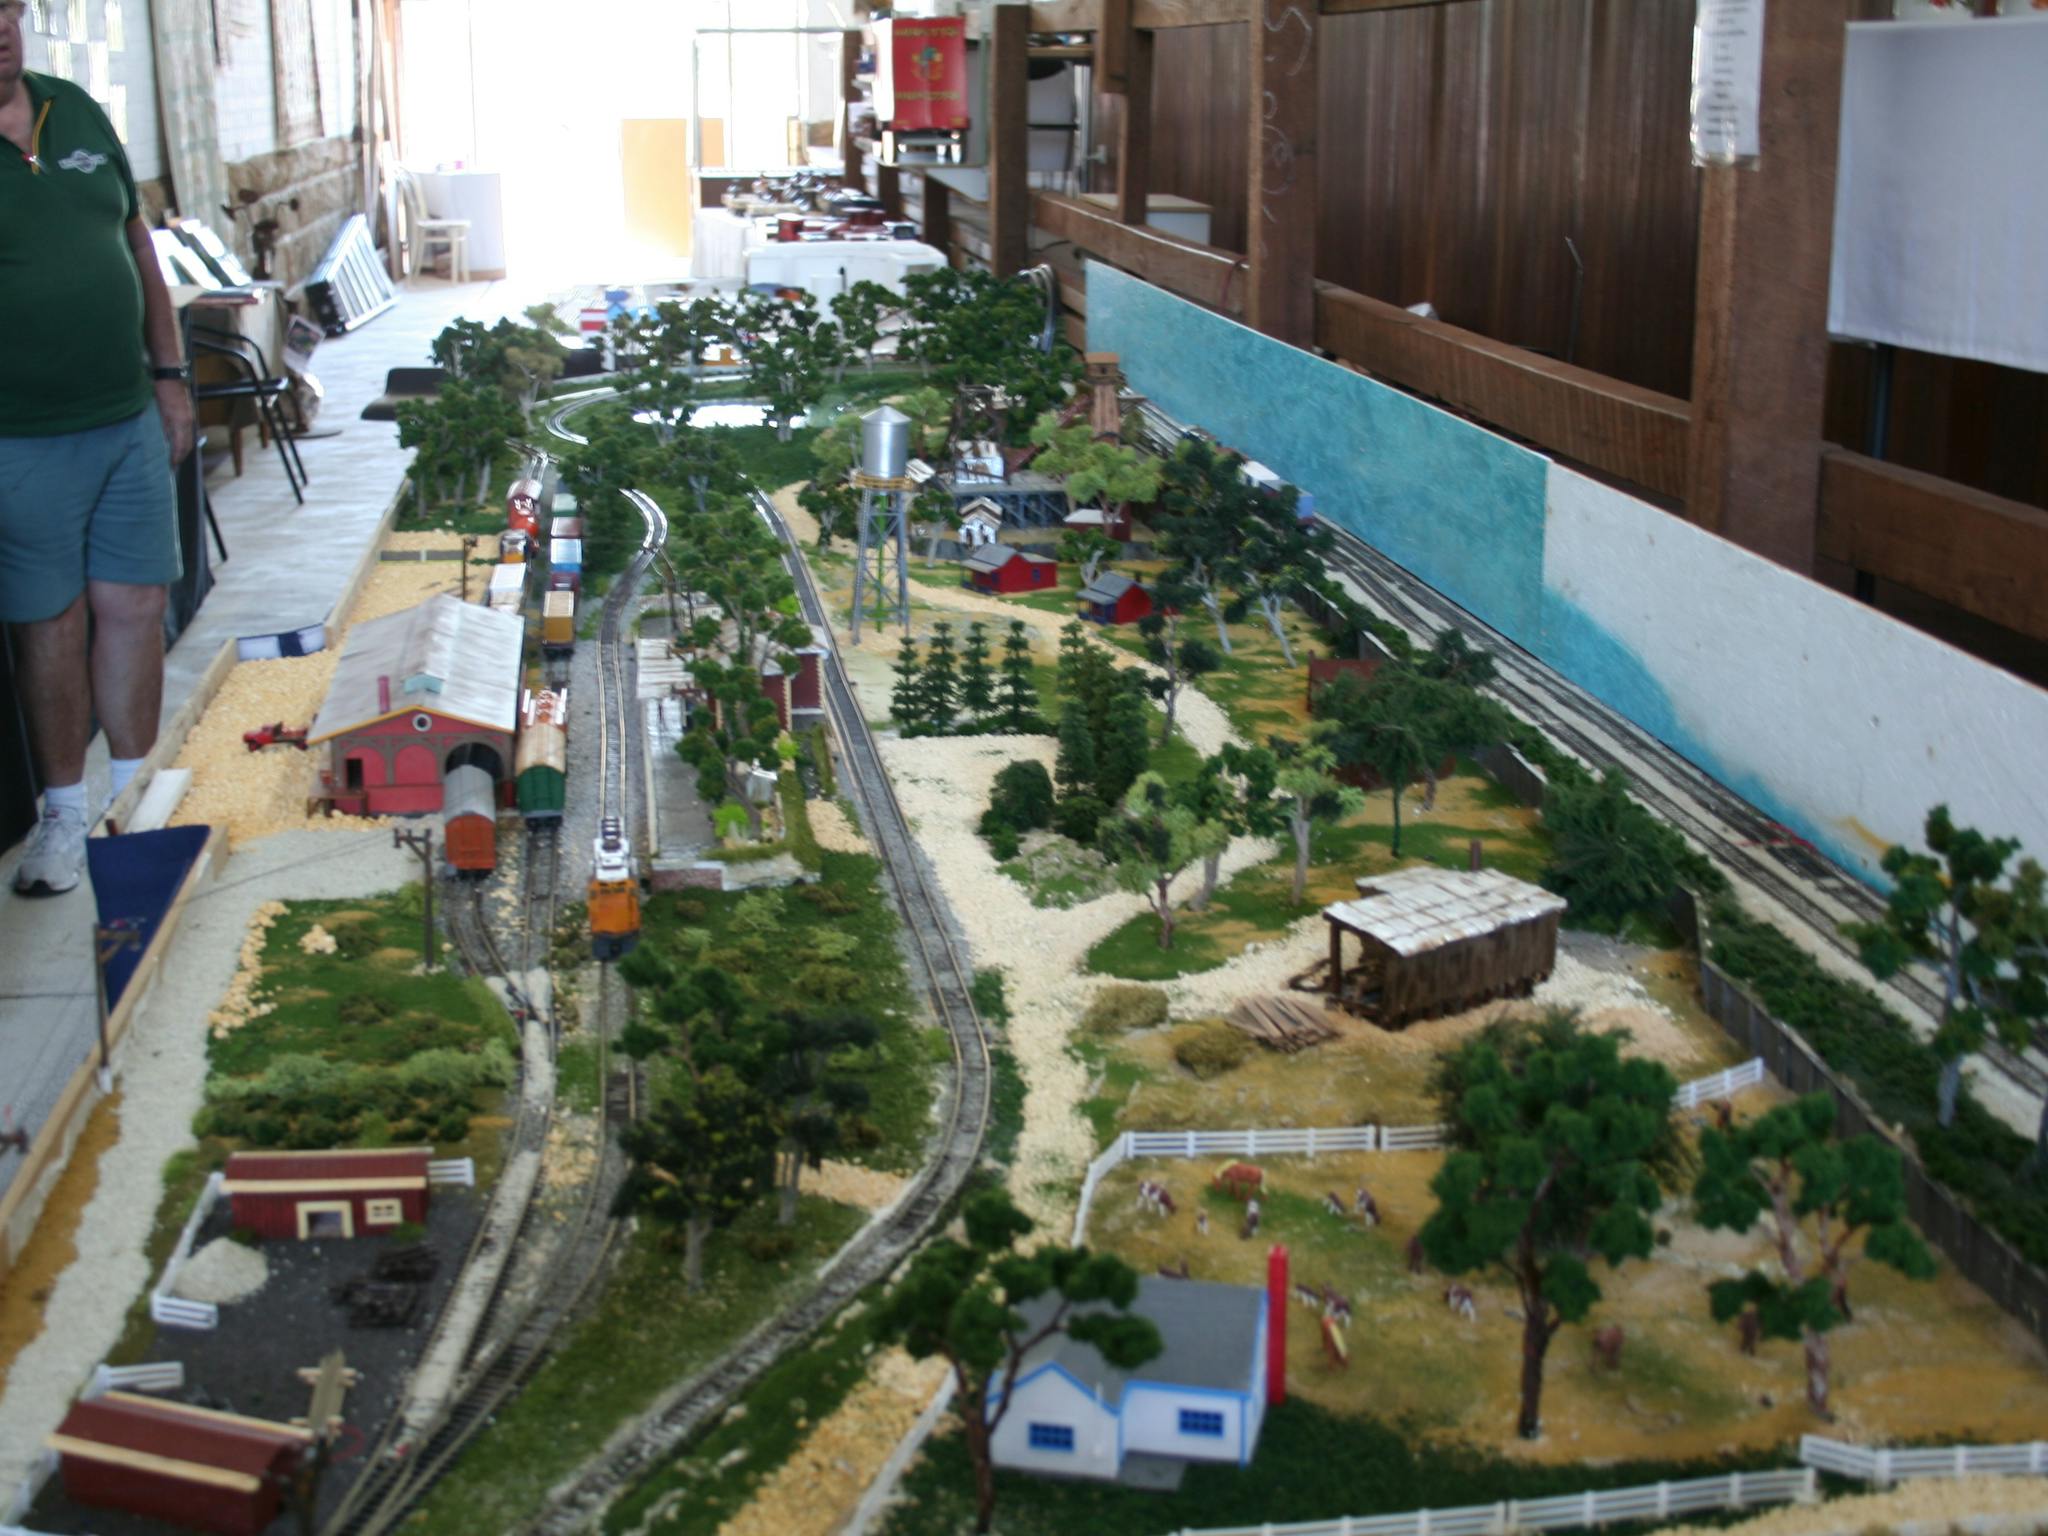 Scale model railway showing through history the growth of Chiltern